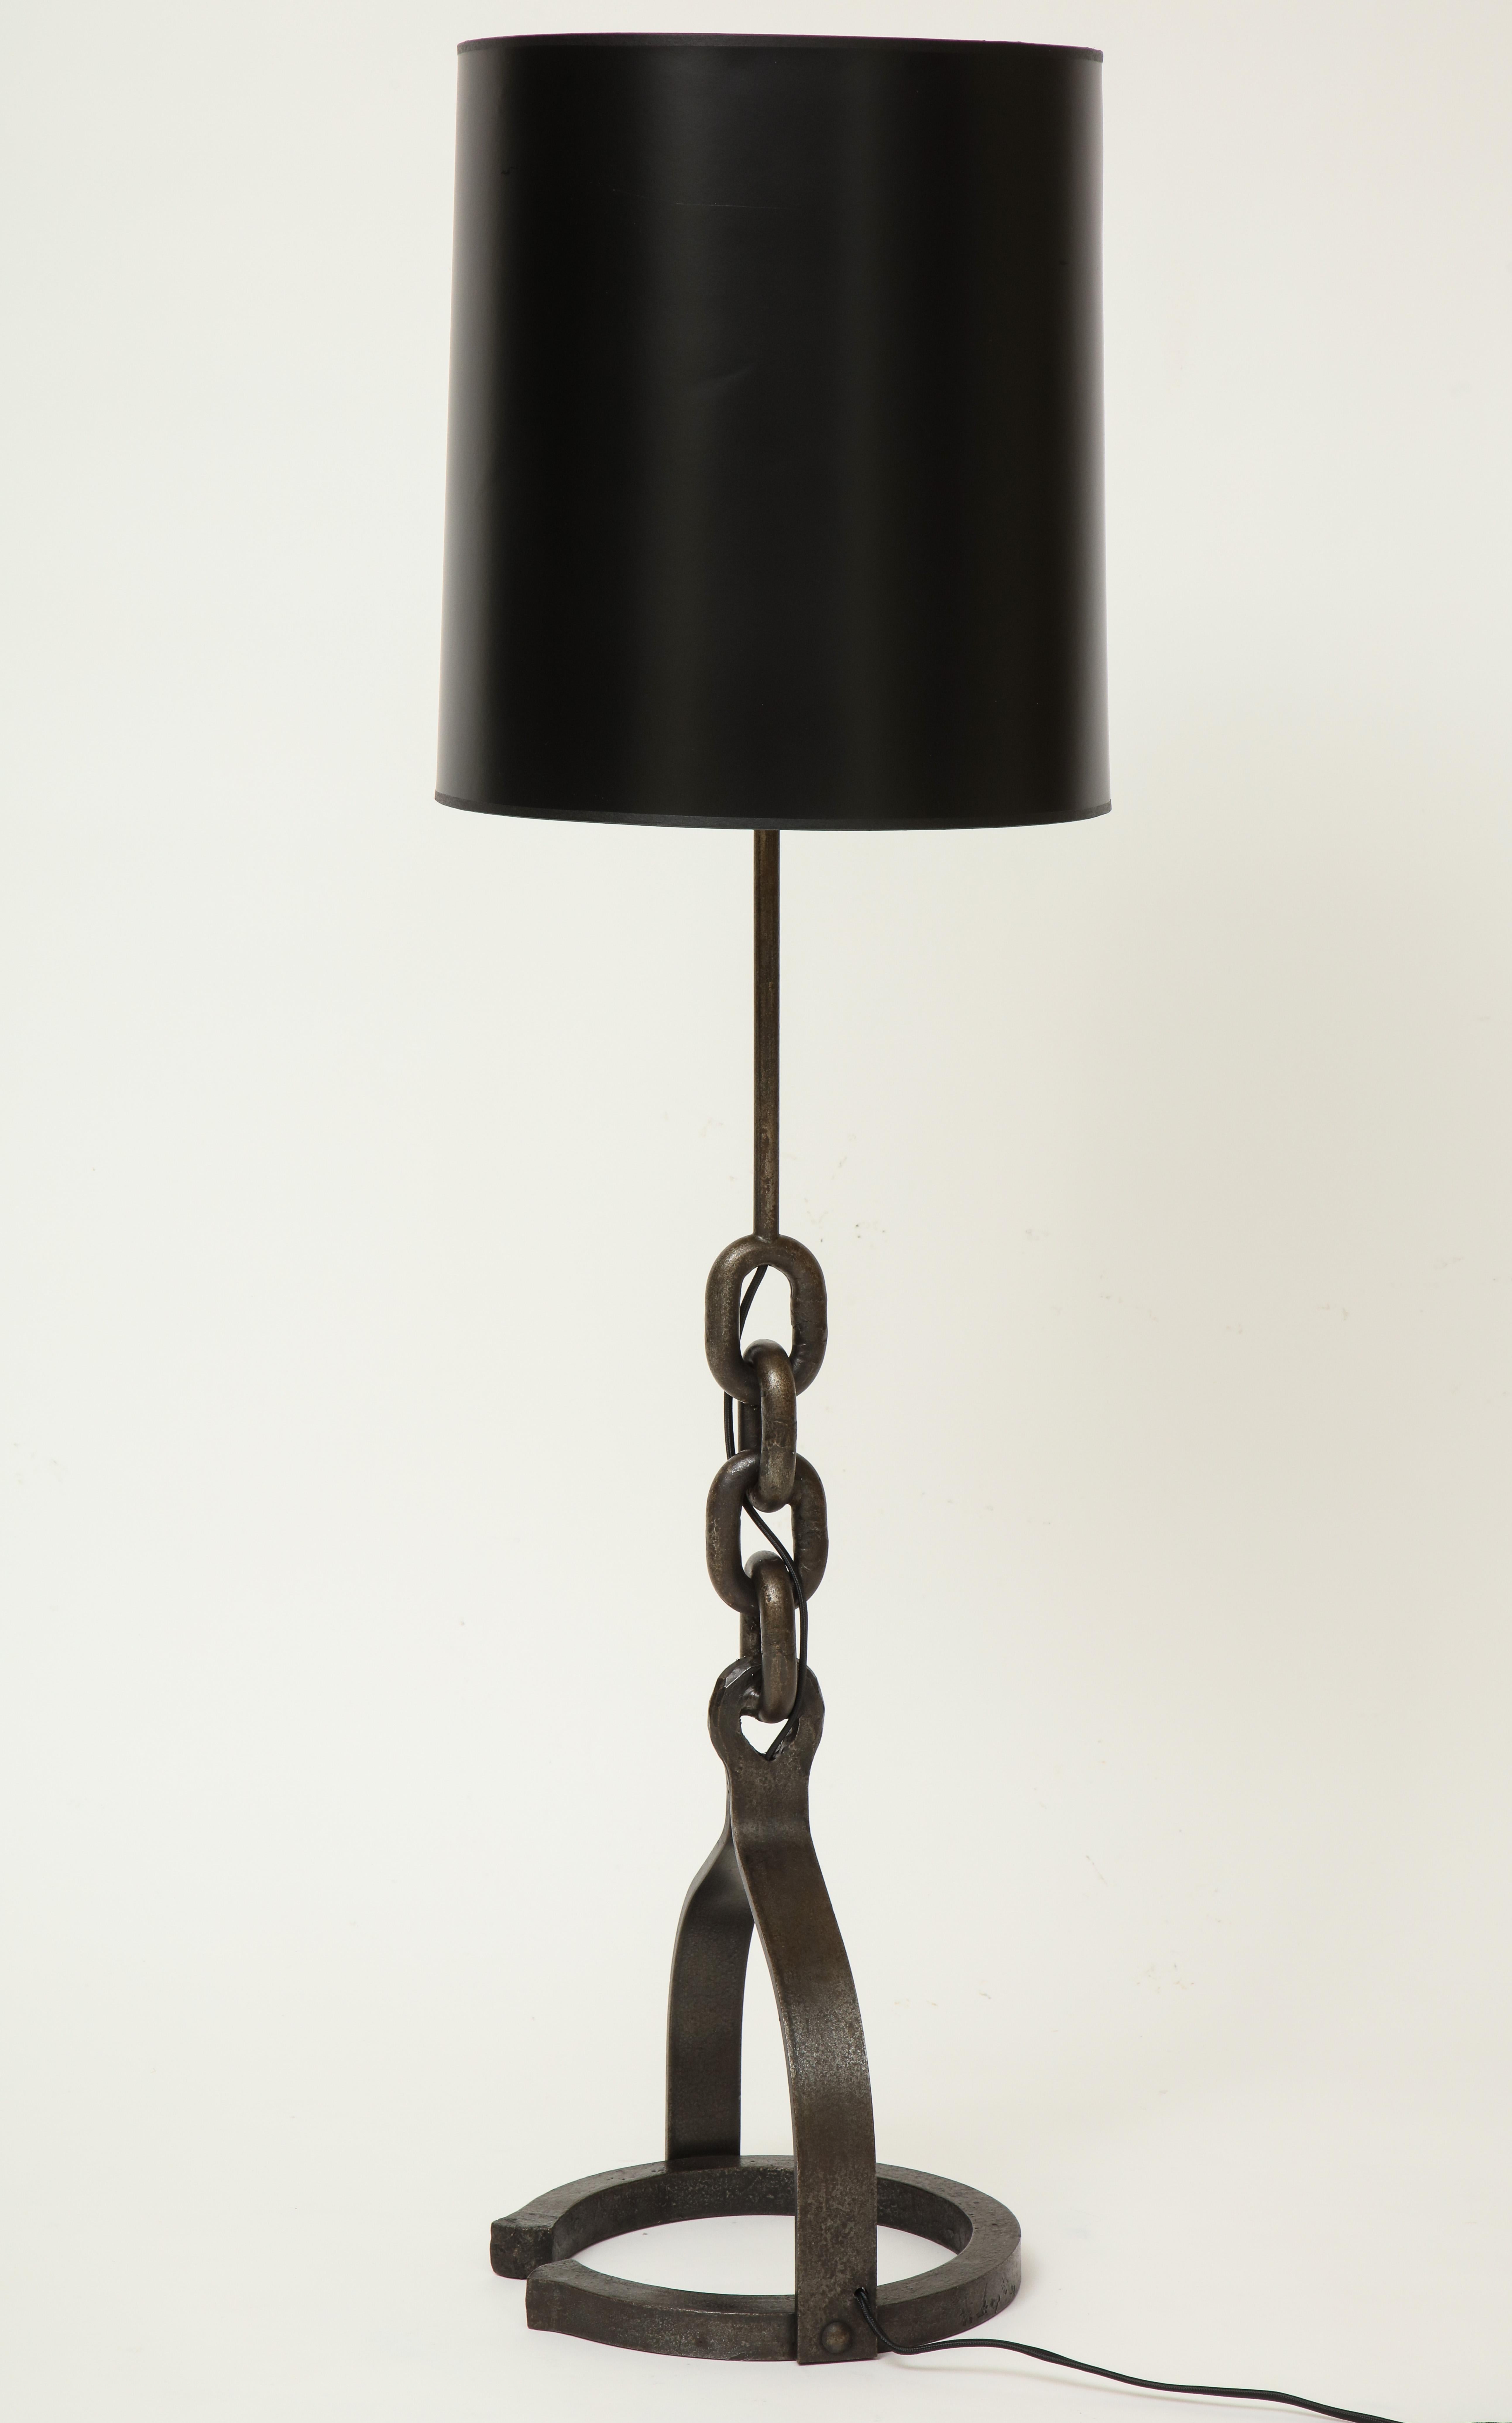 Iron chain attributed to Adnet Horshoe tall lamp, France 

Beautiful and heavy iron chain link lamp with horseshoe bottom. In the style of Franz West or Adnet. Large scale table lamp
Elegant Piece. Imported from France. Late Midcentury. Shade not